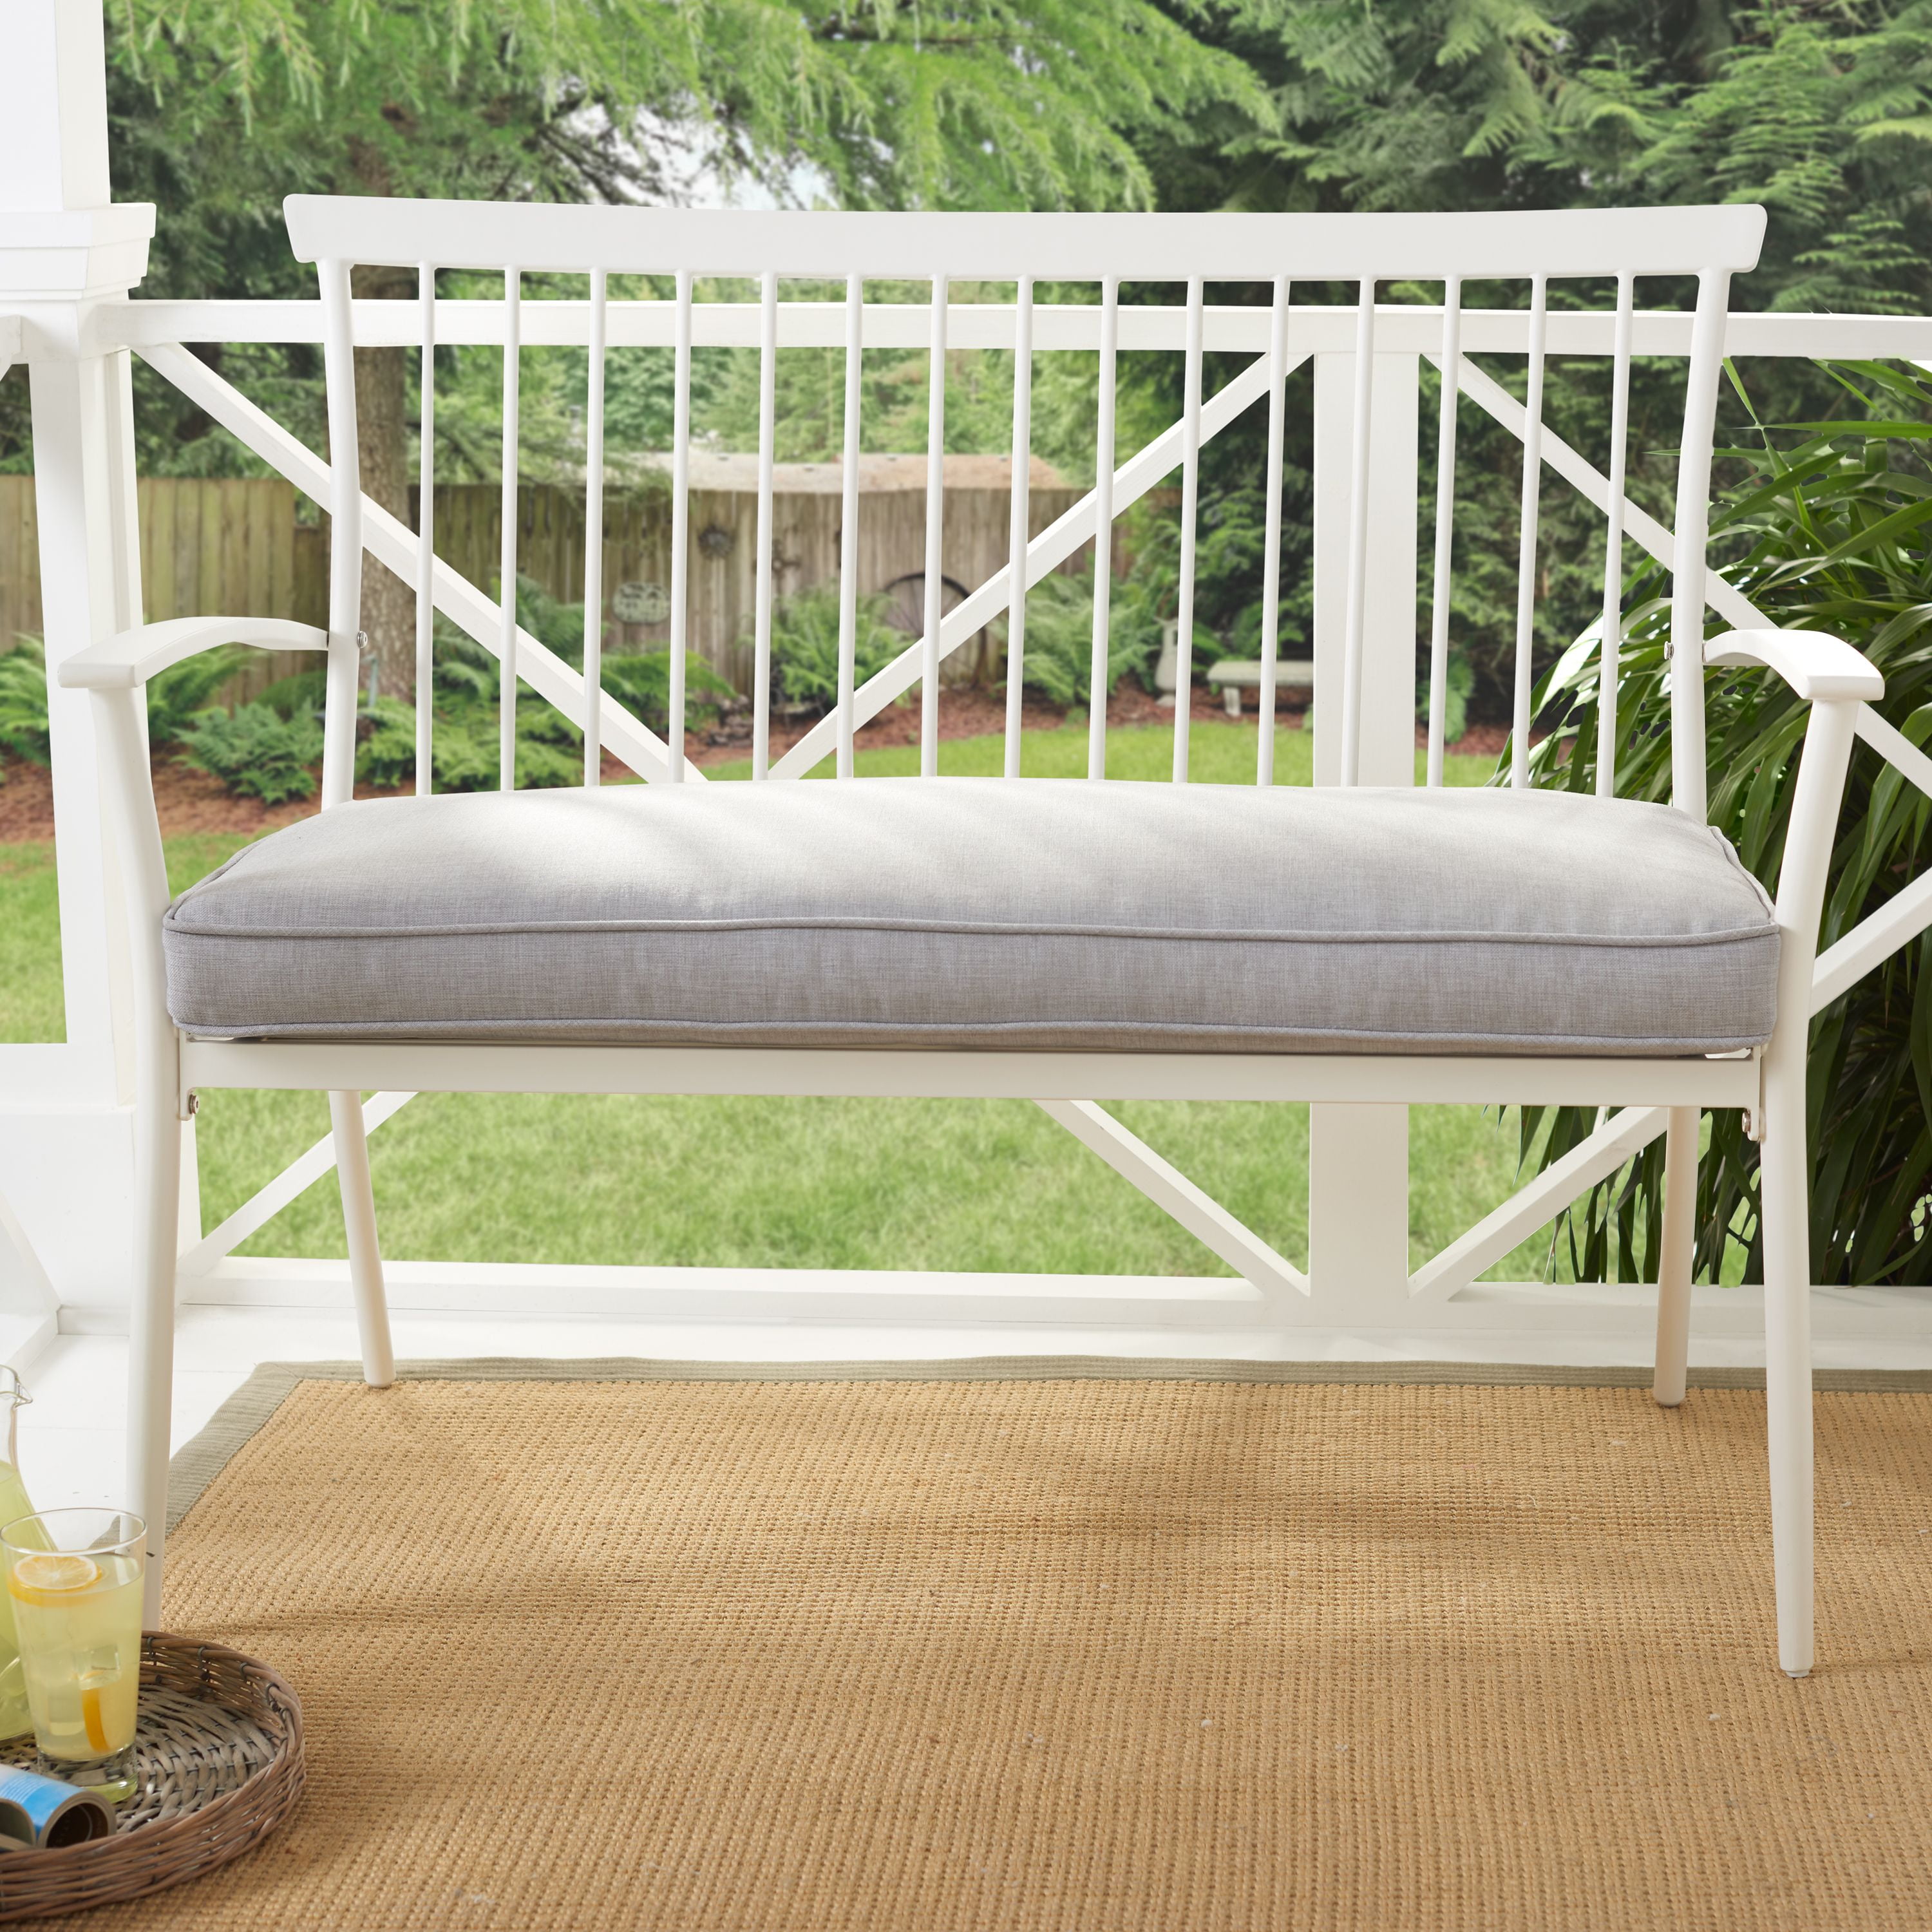 Image of White metal patio bench with cushioned seat